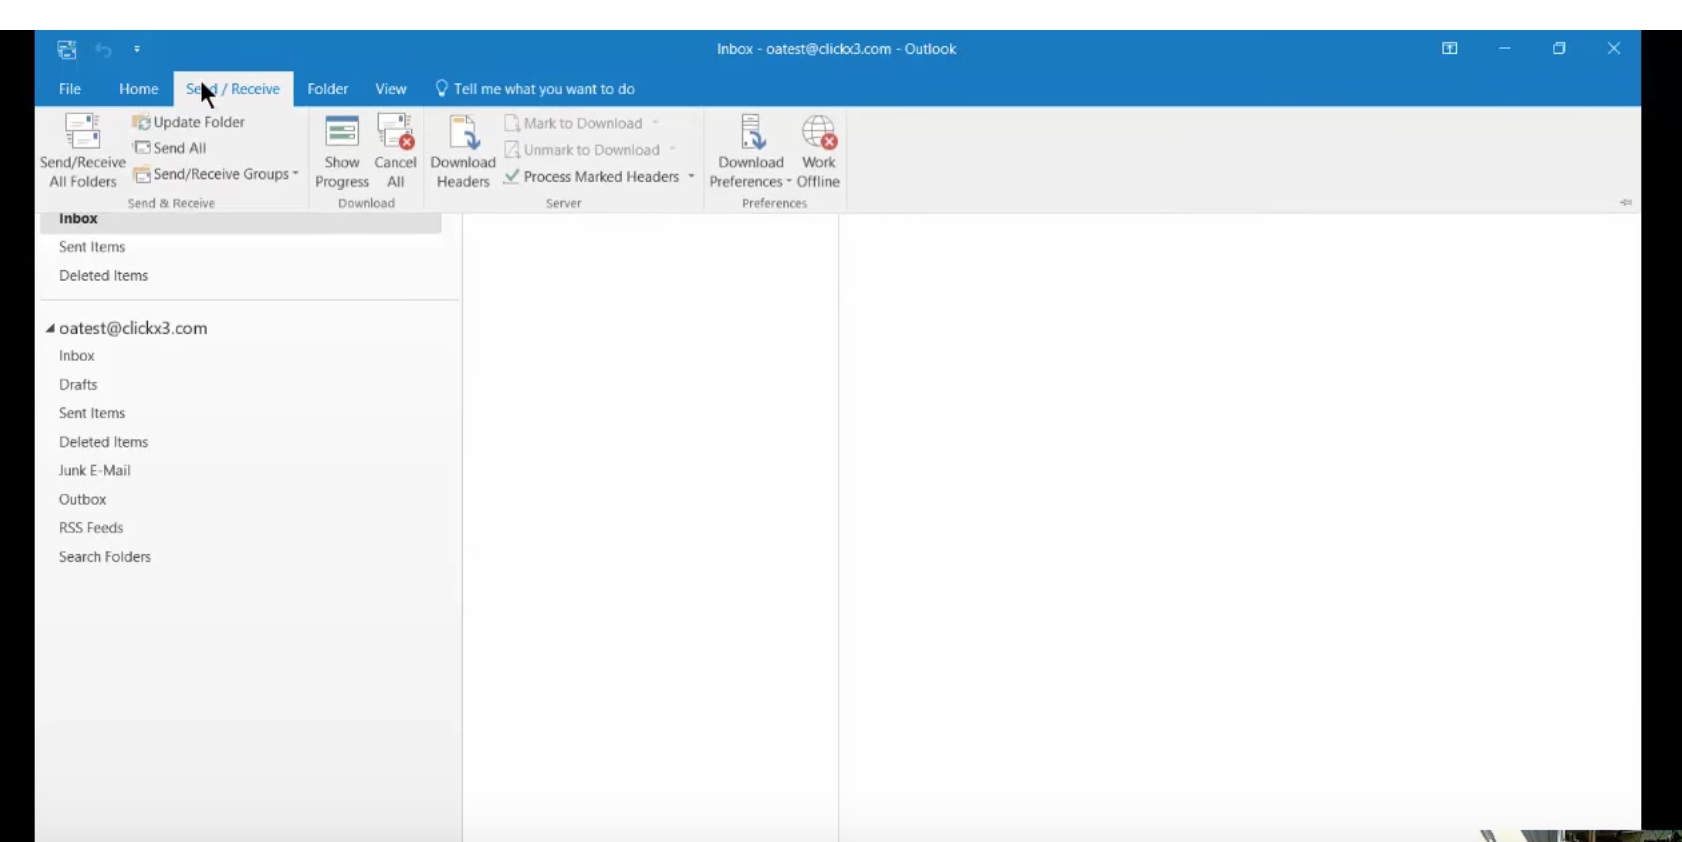 Customize The Ribbon Bar In Microsoft Outlook 2016